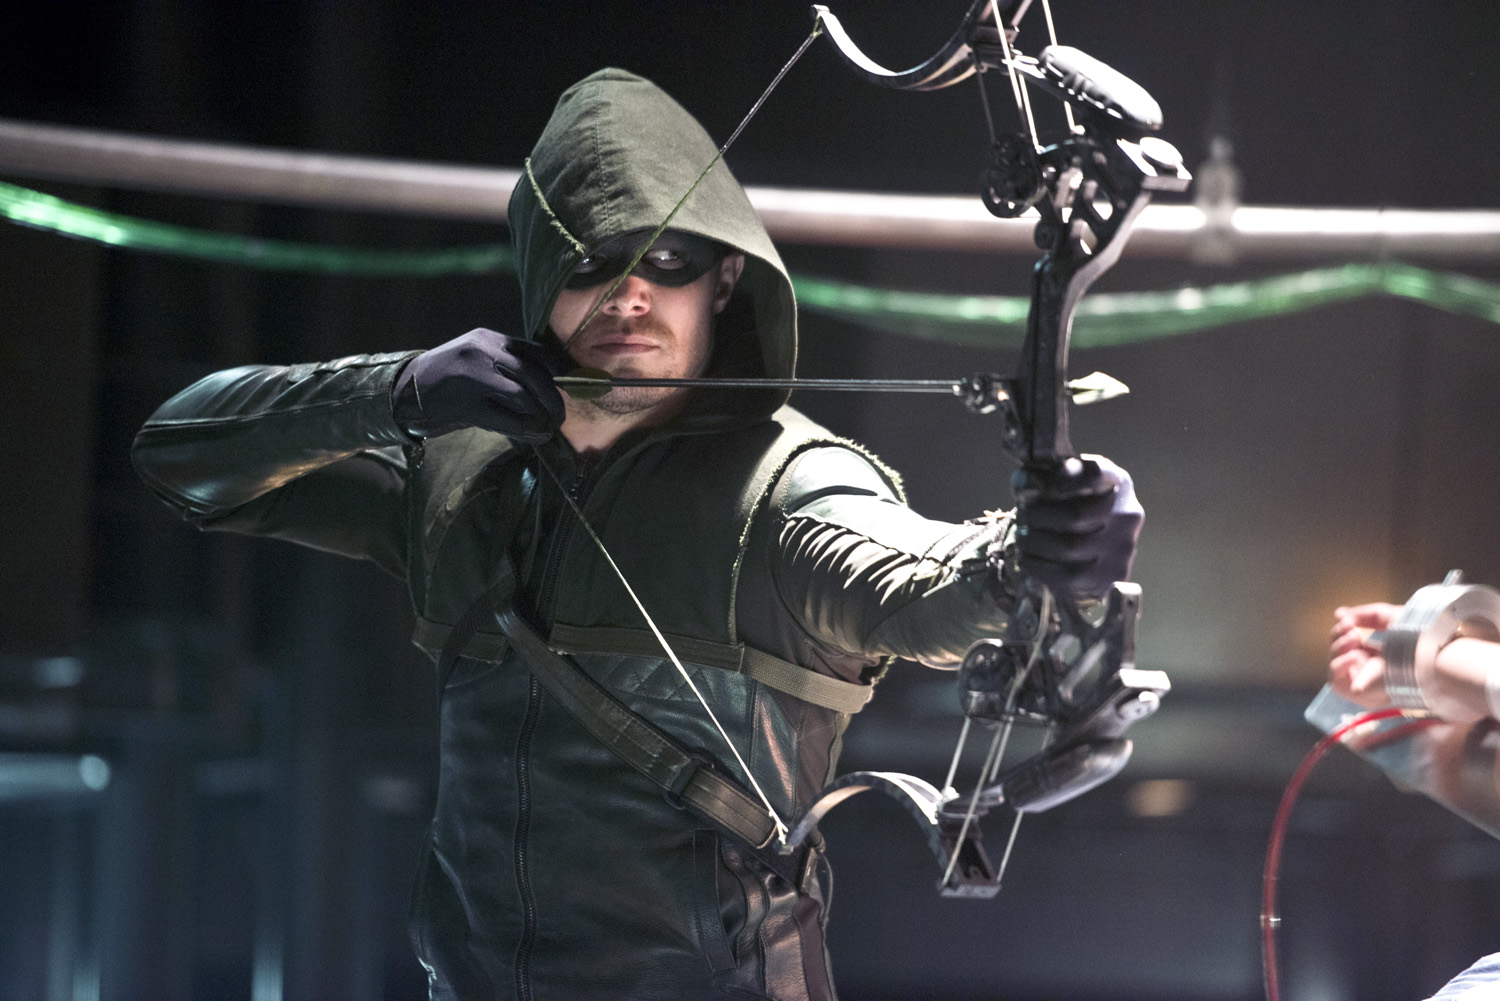 Stephen Amell as The Arrow in "The Man Under the Hood" episode.